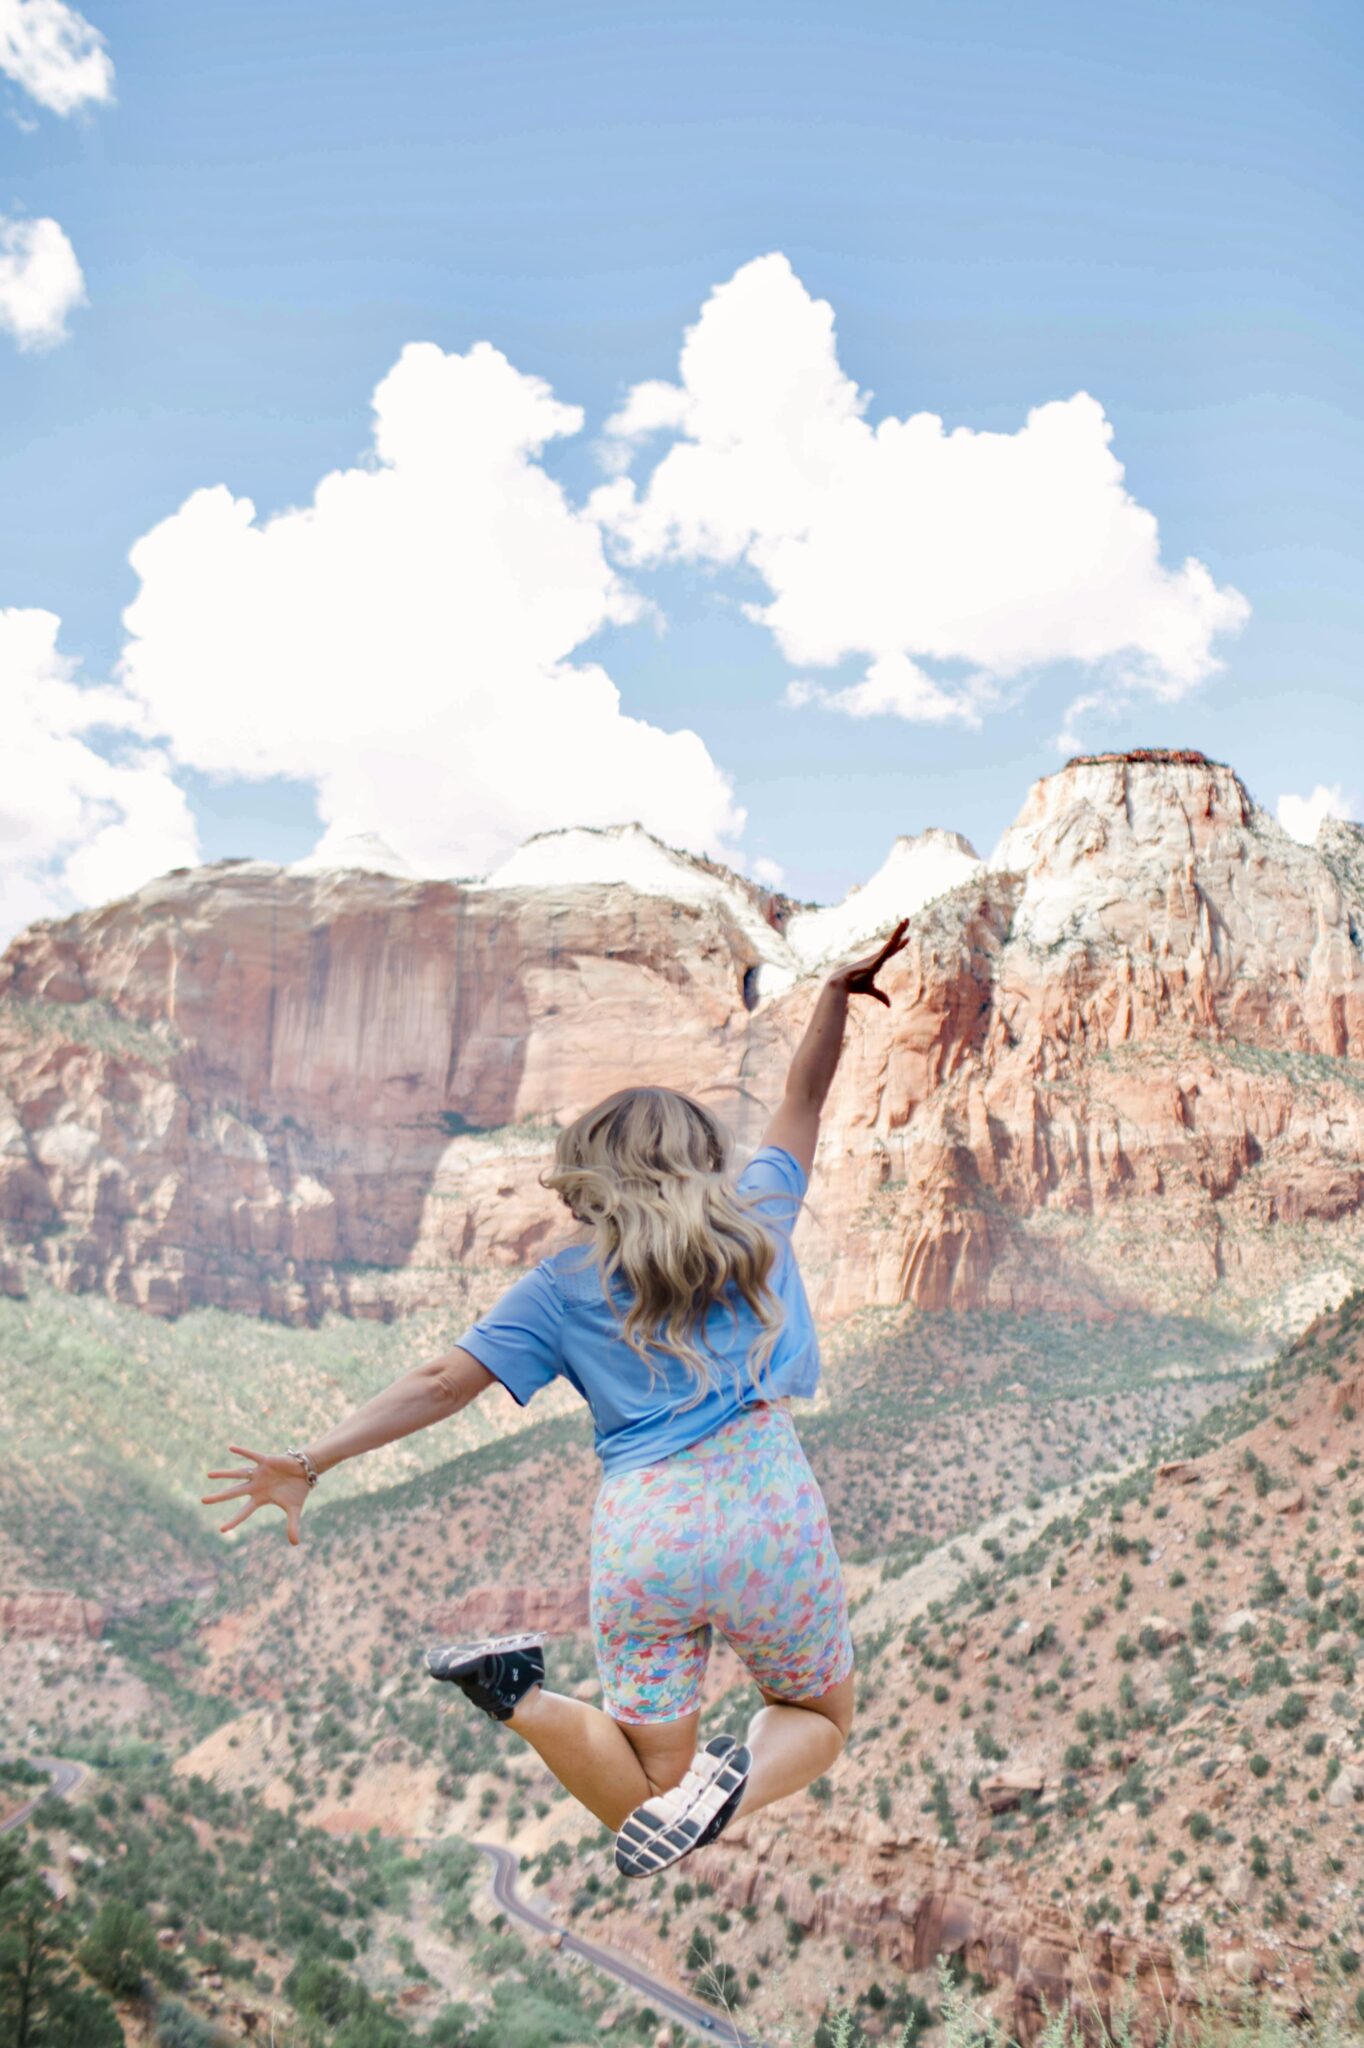 zion national park, outdoor adventures, outdoor trip ideas, athletic outfit, athleisure, day trips from vegas